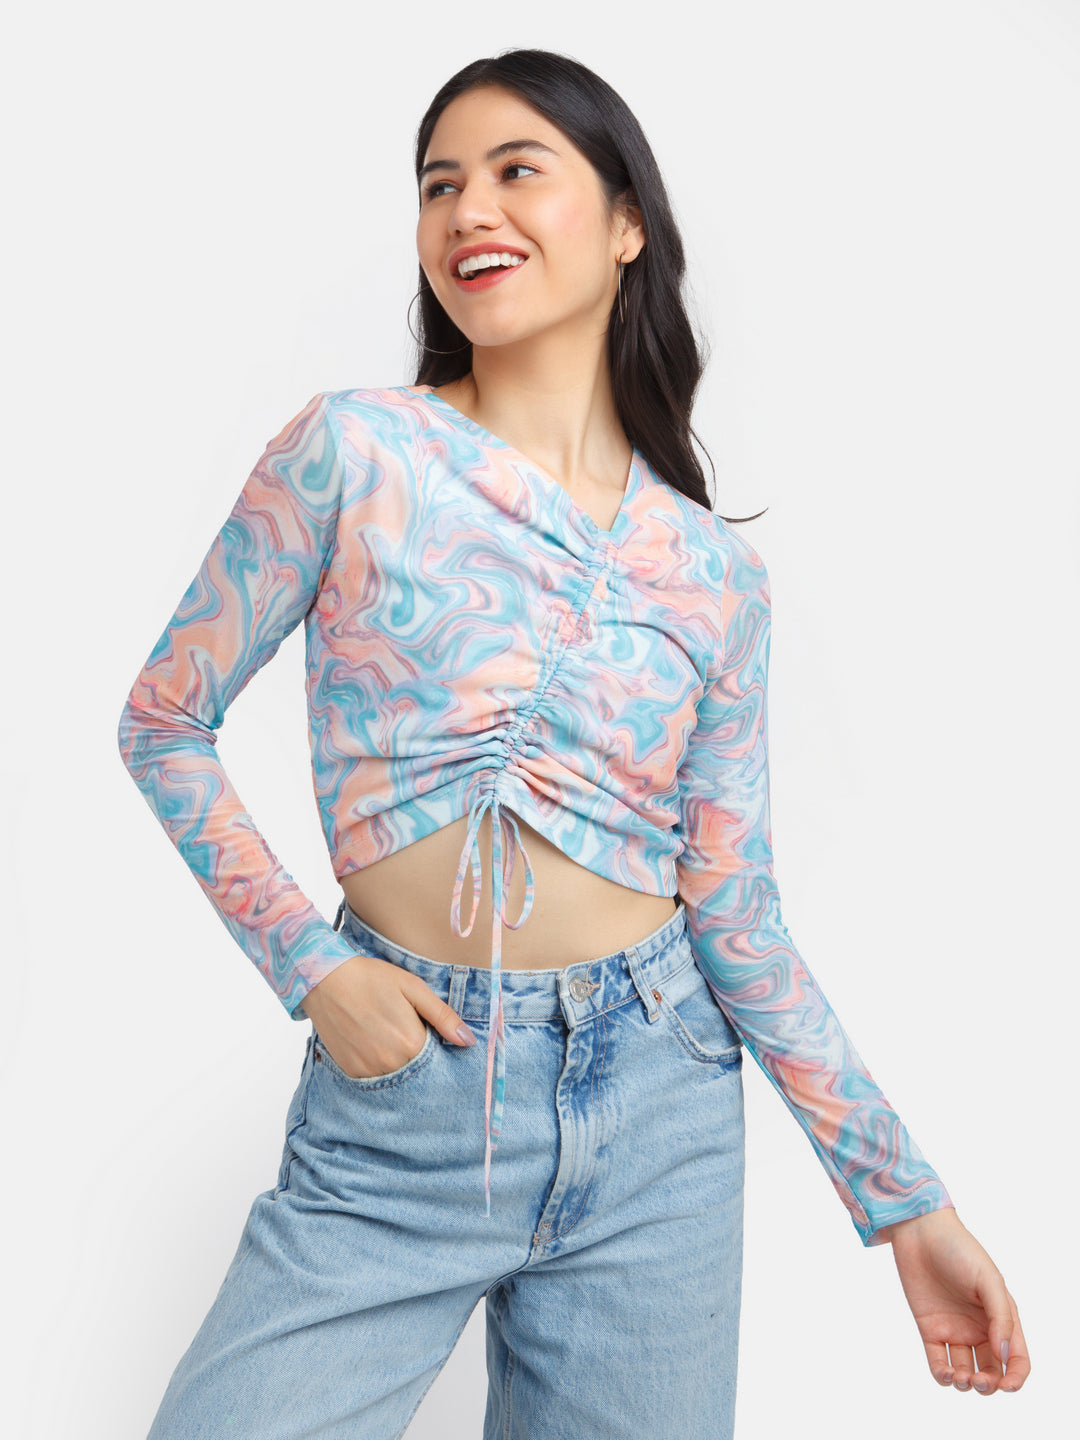 Multicolored Printed Ruched Top For Women